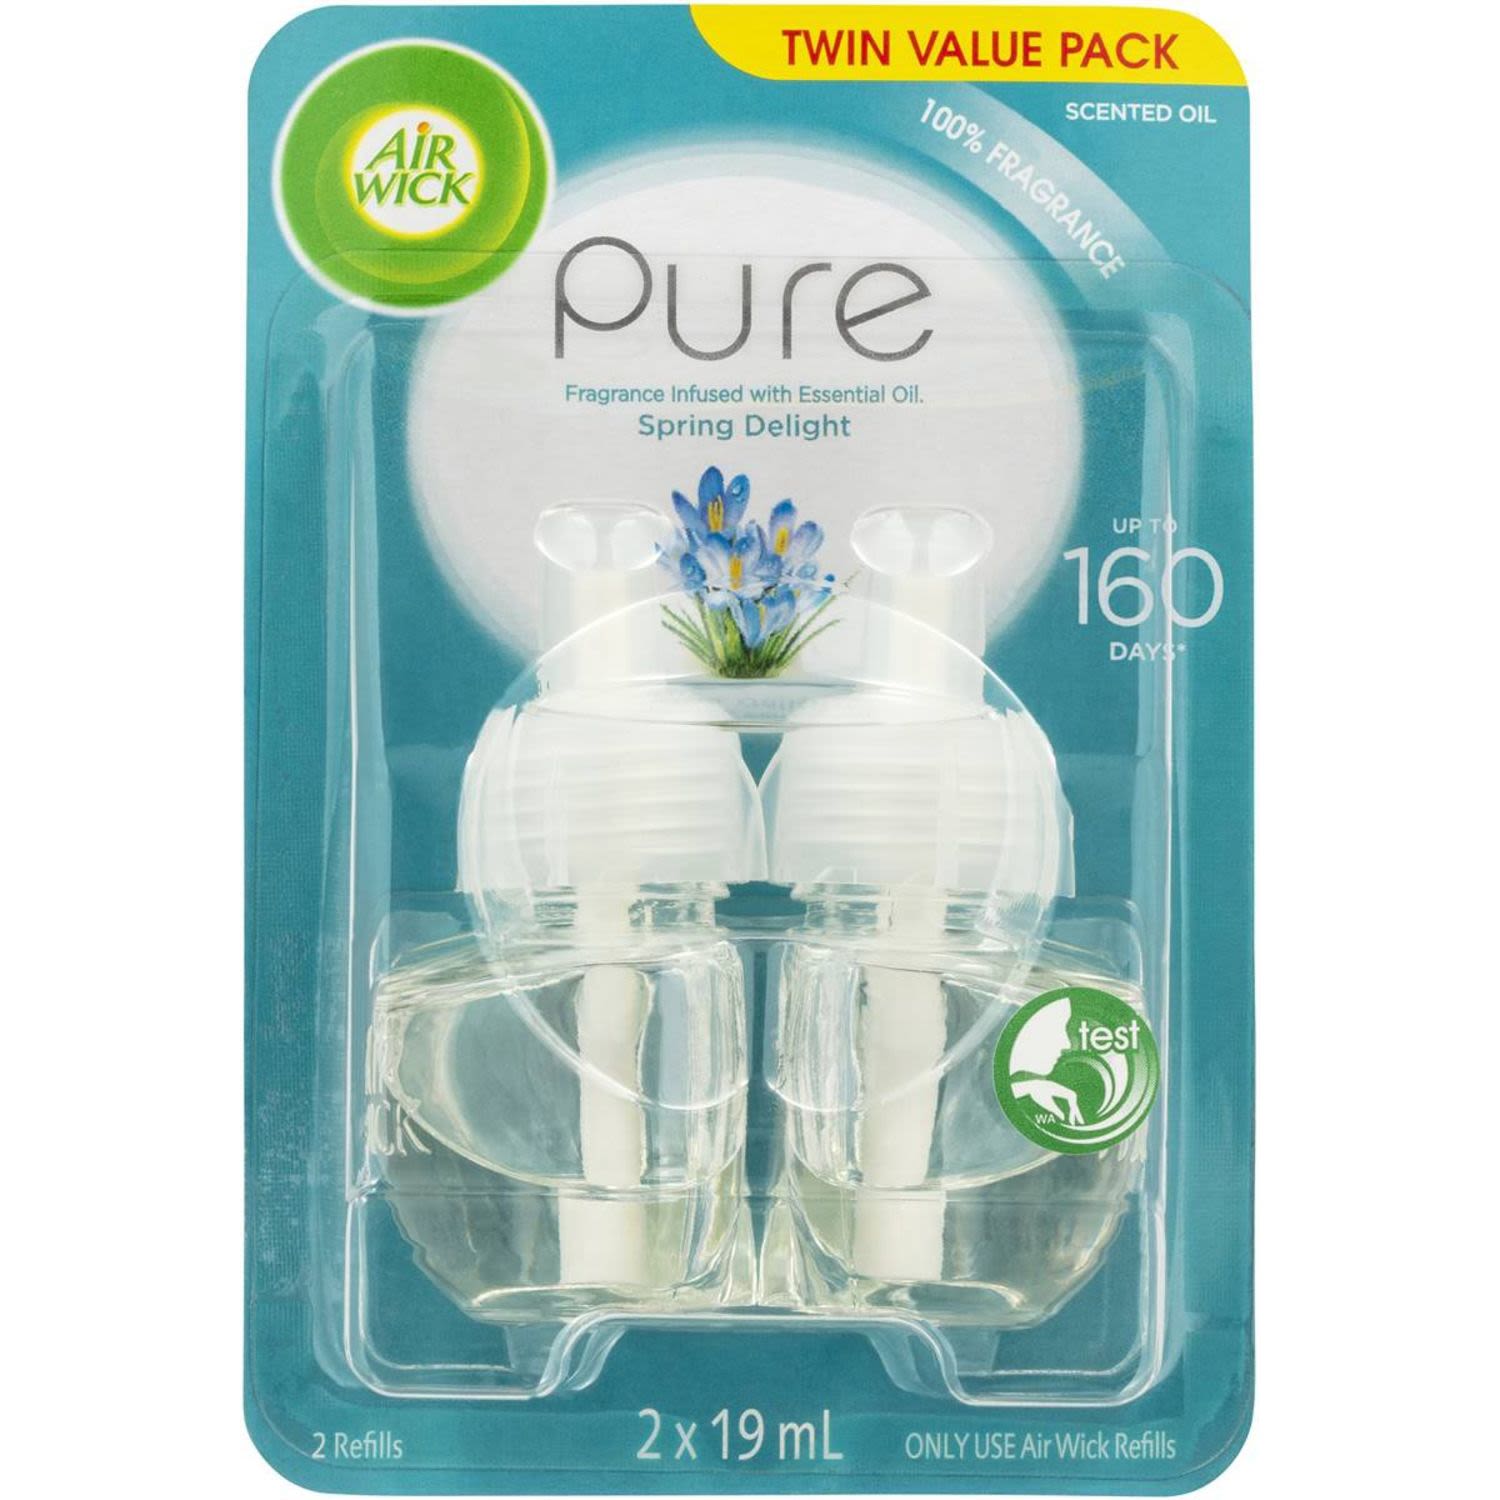 Air Wick Electric Plug In Diffuser Pure Spring Delight Twin Refill - Enhance your home with the rejuvenating scent of Spring Delight. Refreshingly clear waters, the season’s first blooms and hints of freshly picked fruits evoke the hope and joy of Spring. Vibrant fragrance for up to 160 days per pack (based on 8 hours daily usage on minimum setting). Consider using in… Bedroom, Living Room, Bathroom, Kitchen, Laundry, Office.<br /> <br />